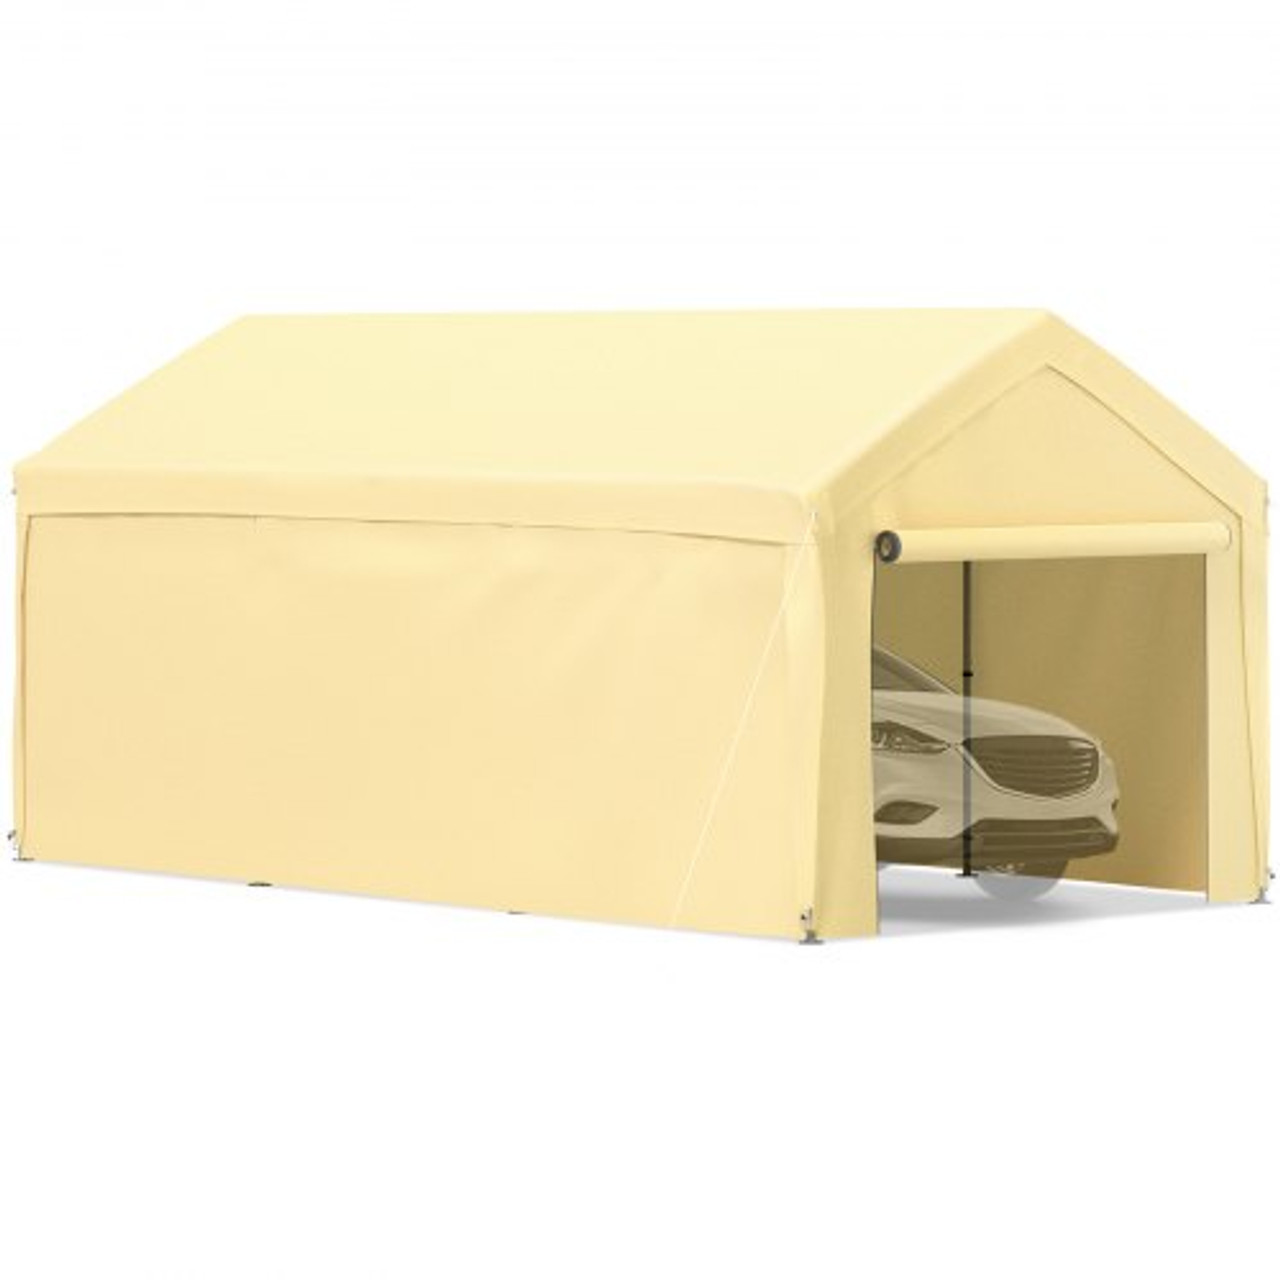 Carport Canopy Car Shelter Tent 13 x 20ft with 8 Legs and Sidewalls Yellow